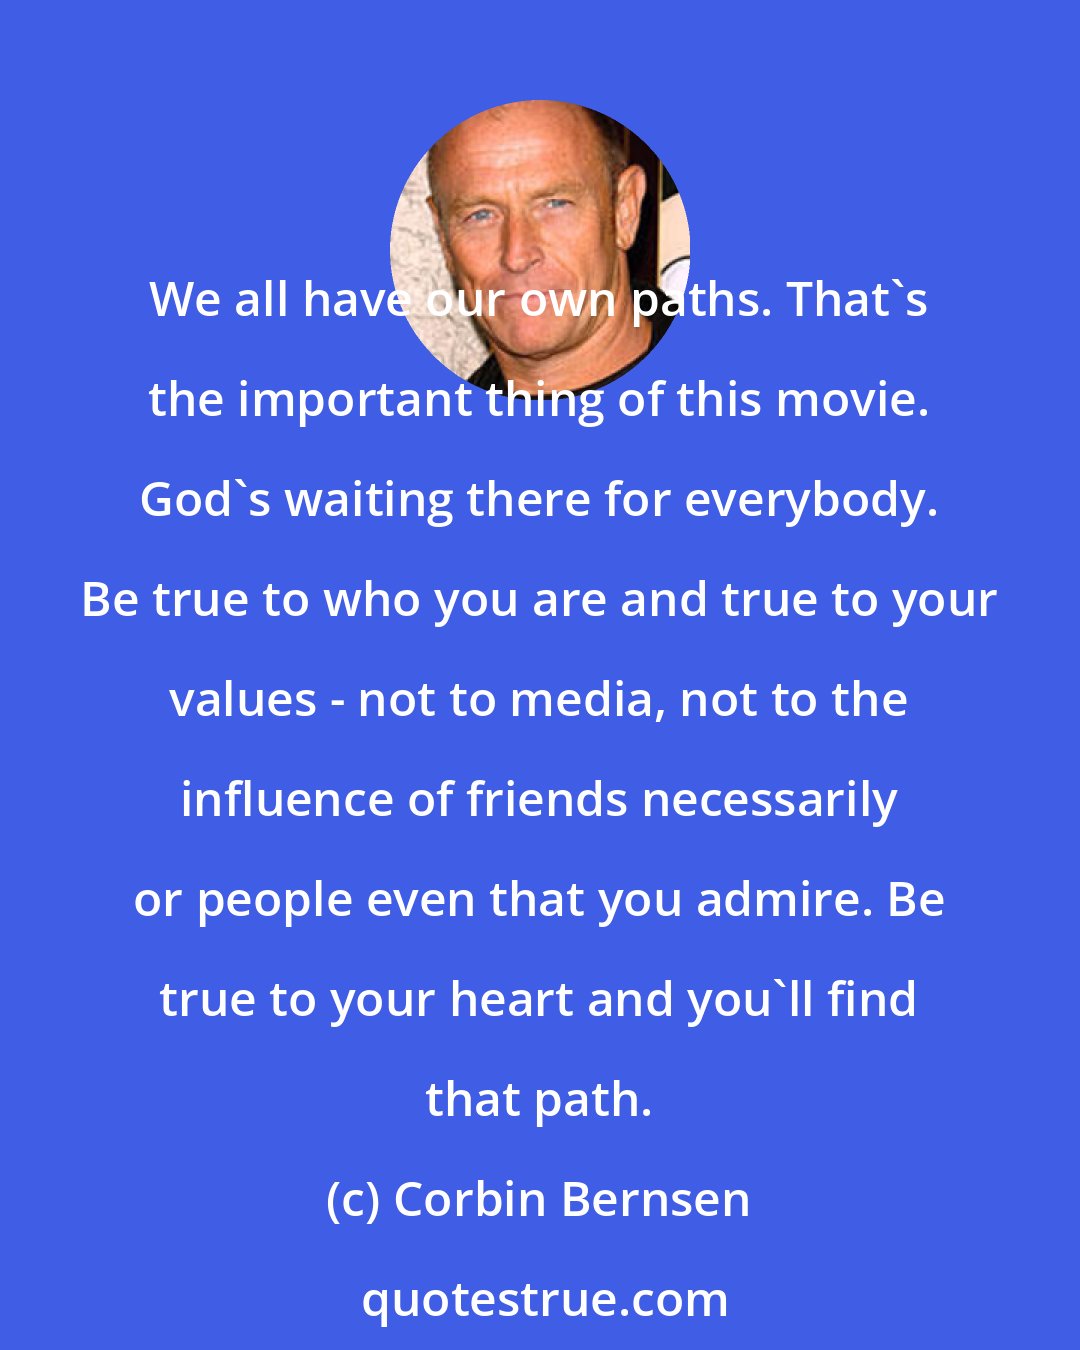 Corbin Bernsen: We all have our own paths. That's the important thing of this movie. God's waiting there for everybody. Be true to who you are and true to your values - not to media, not to the influence of friends necessarily or people even that you admire. Be true to your heart and you'll find that path.